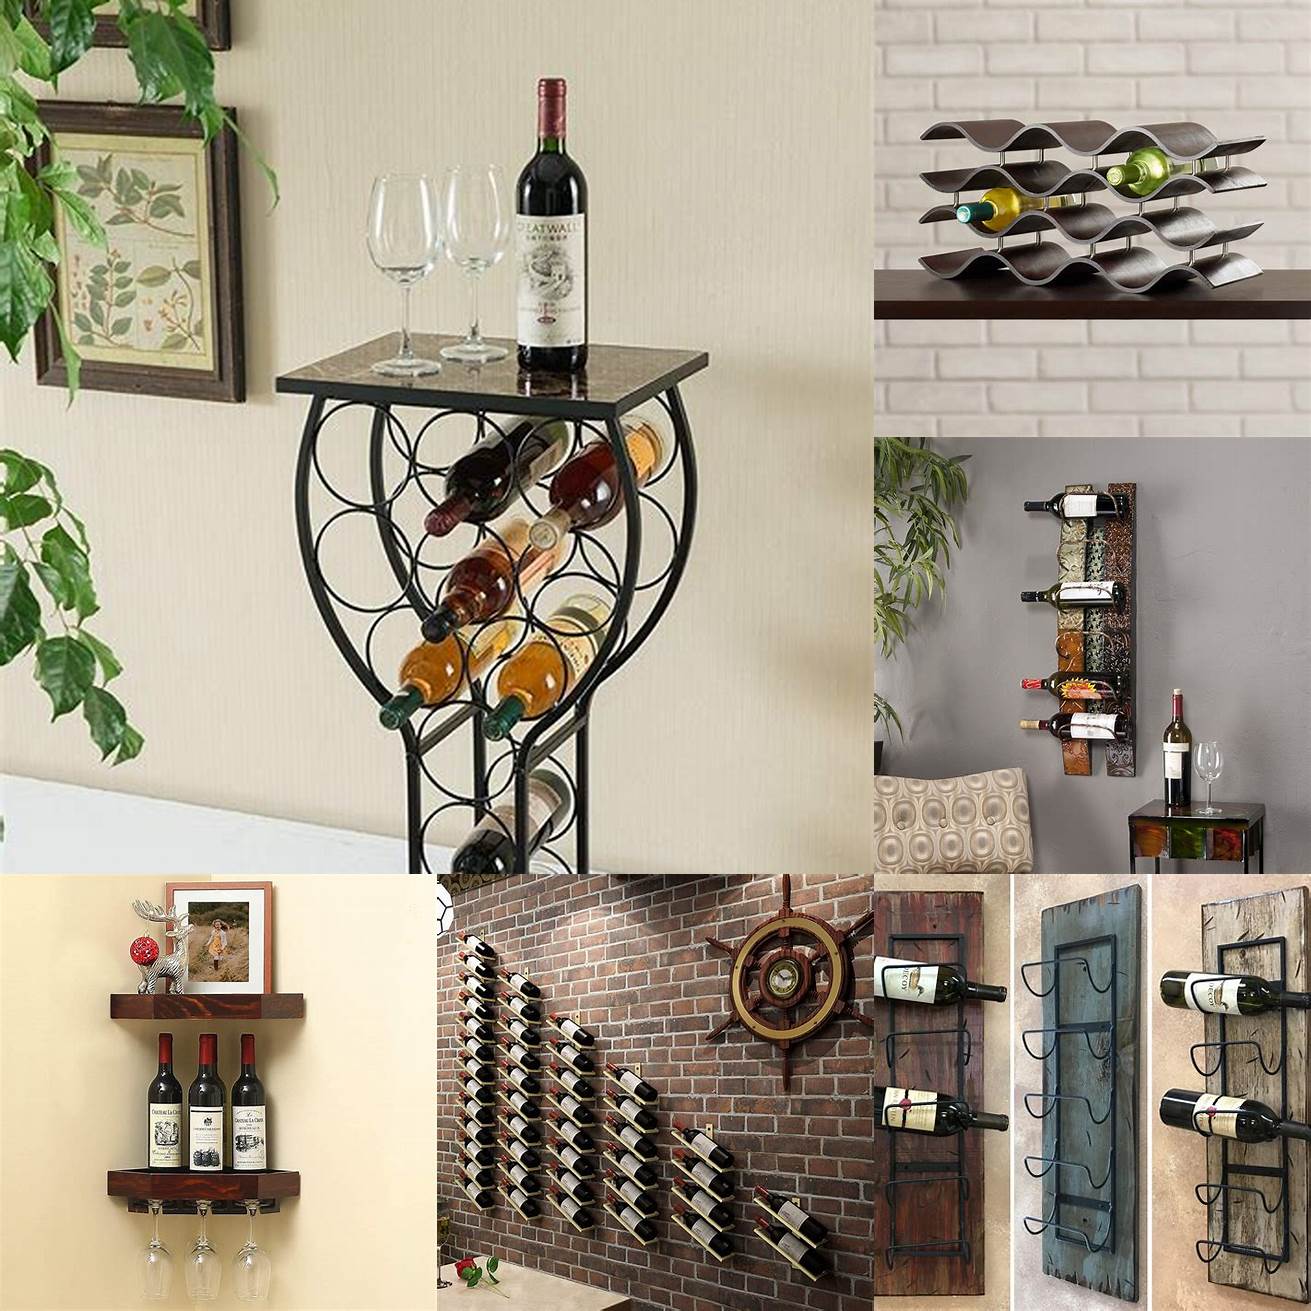 A wine rack with decorative accents